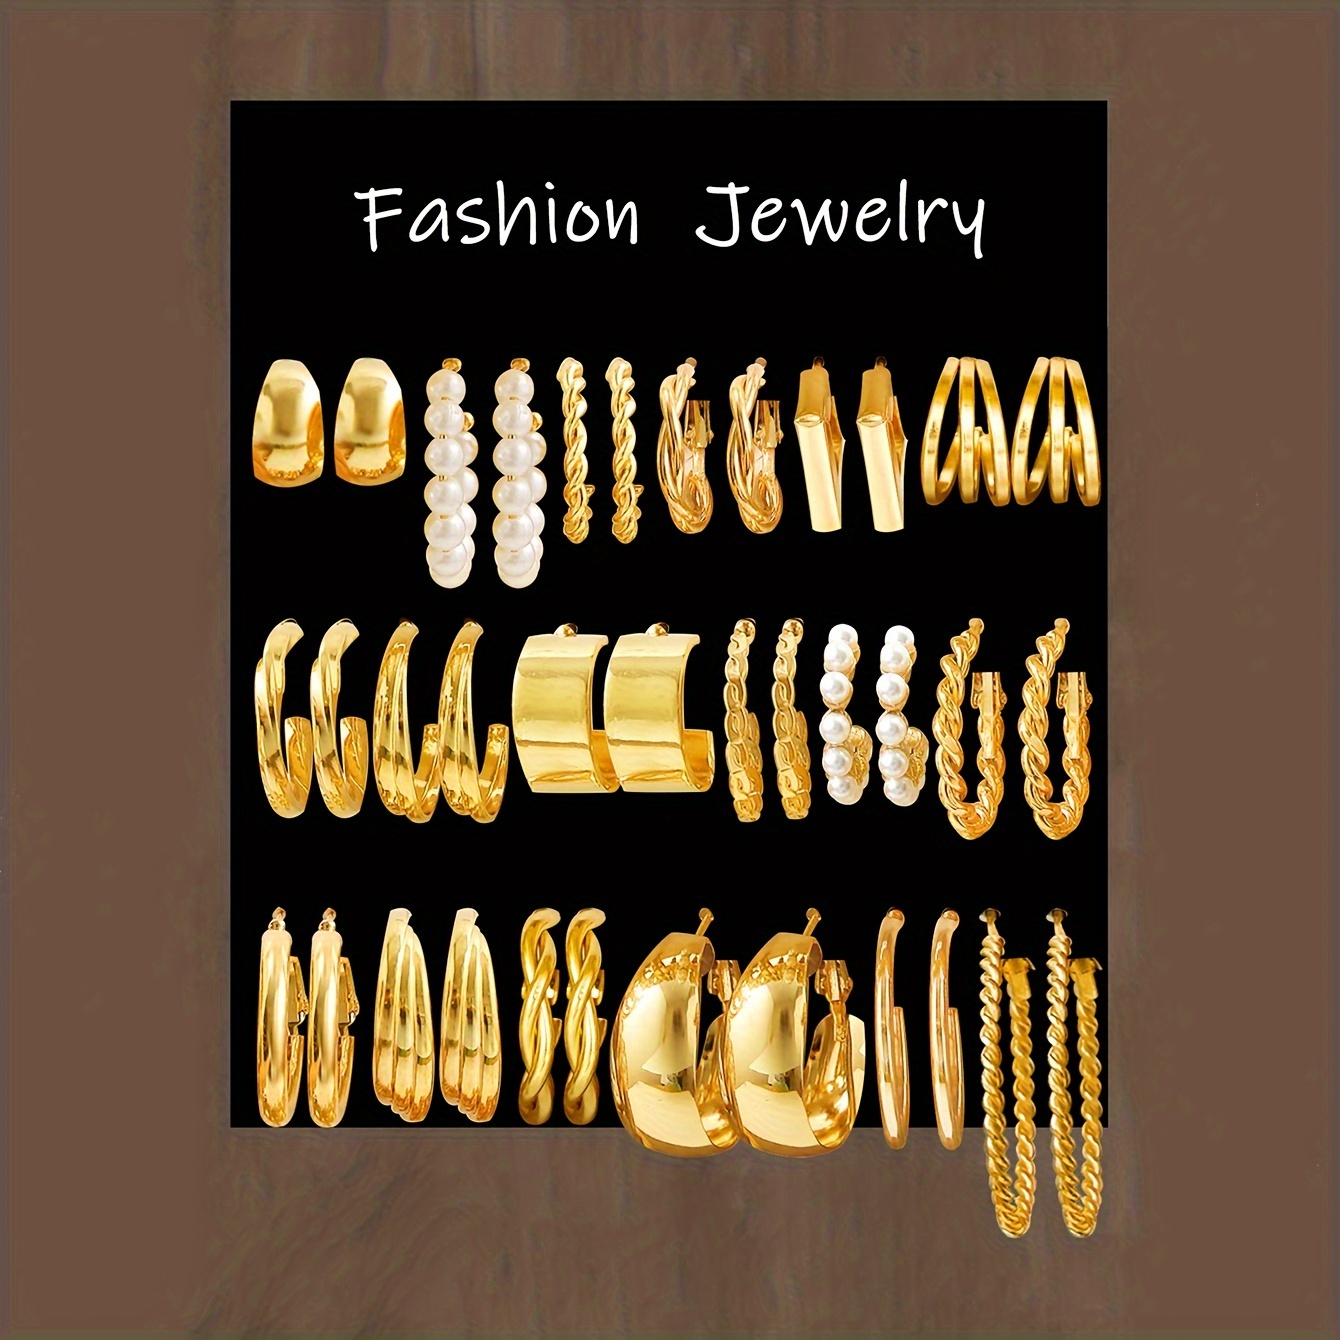 

Elegant Luxury Gold-tone Hoop Earrings 36-piece Set, Fashion Jewelry For Women, Alloy & Stainless Steel, No Mosaic, Versatile For Daily Wear & Parties, Ramadan Gift Collection